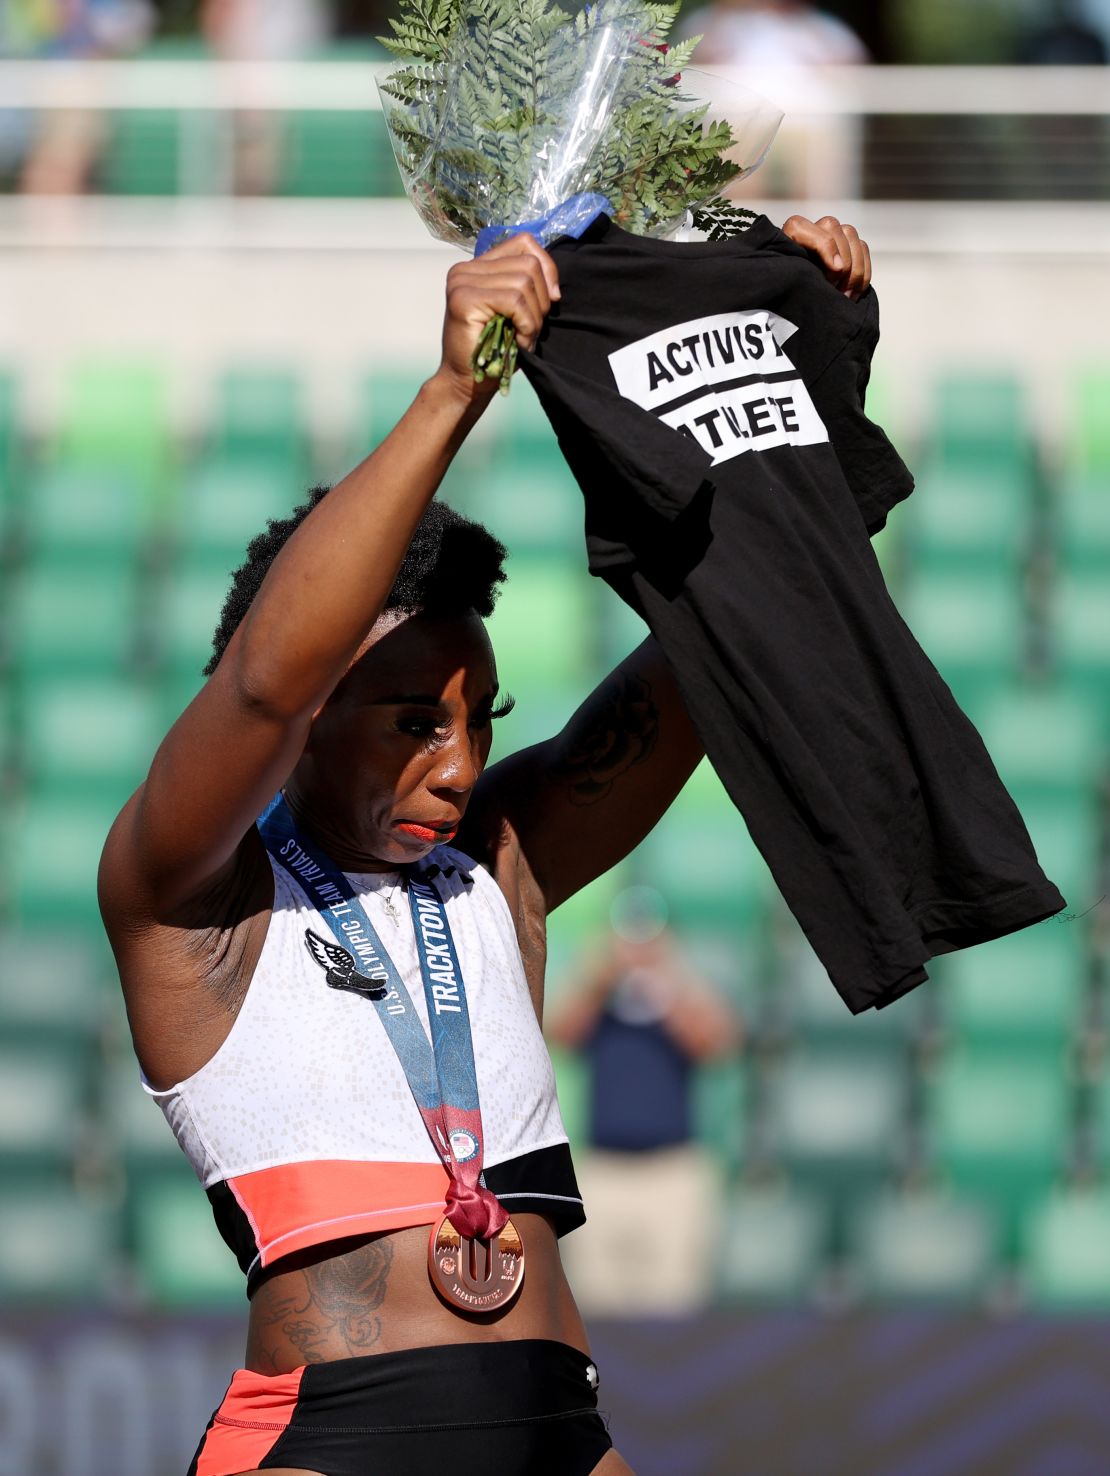 Gwen Berry holds up a shirt reading "Activist Athlete" as she celebrates finishing third in the Women's Hammer Throw final on day nine of the 2020 US Olympic Track & Field Team Trials on June 26, 2021.